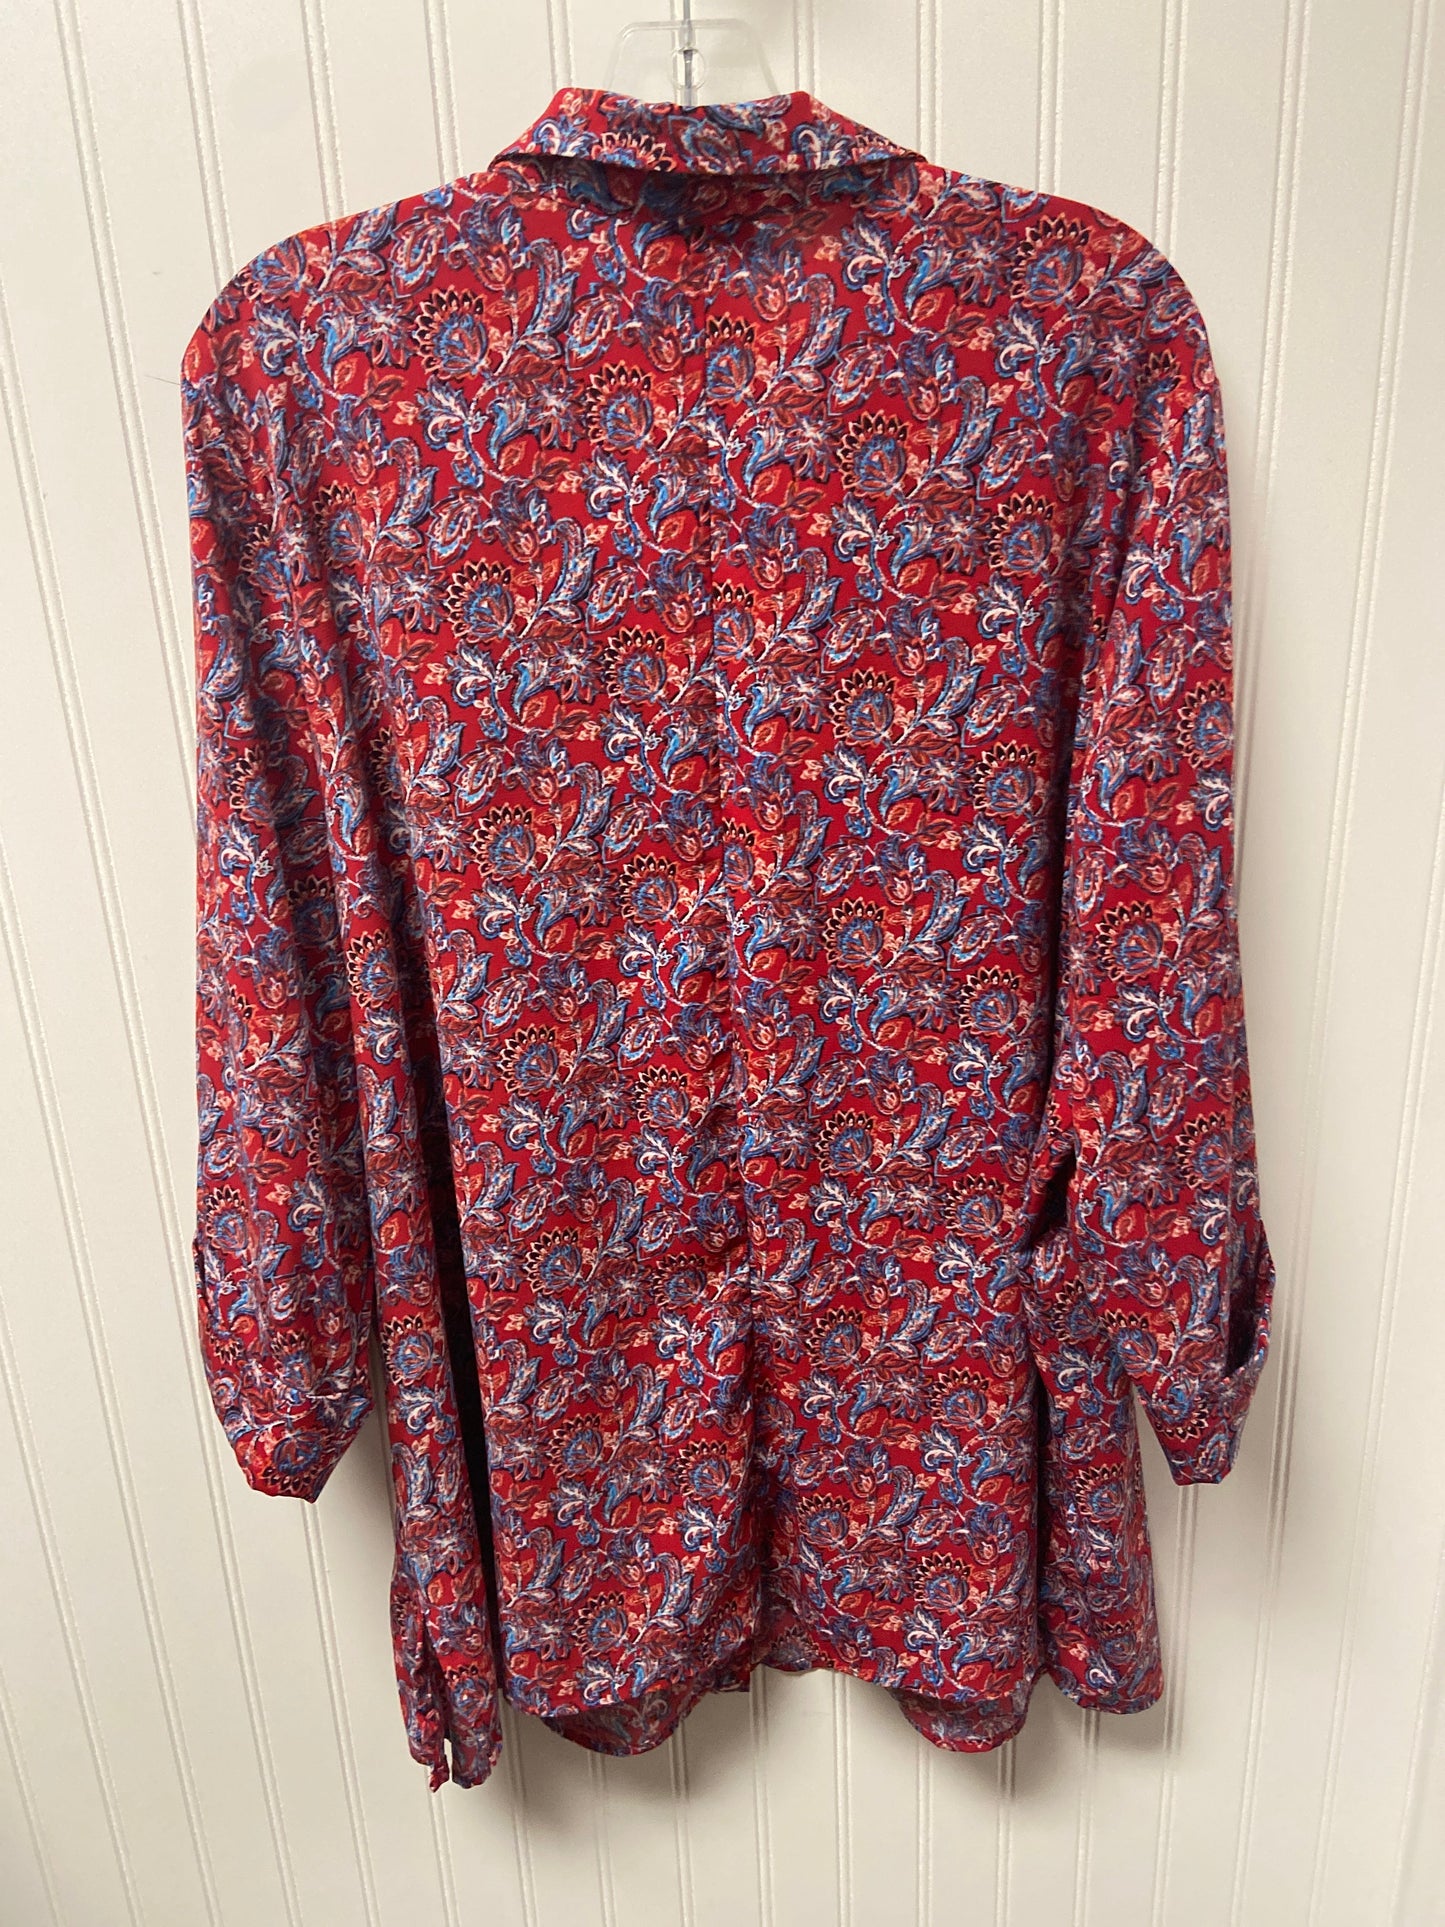 Red Blouse Long Sleeve Catherines, Size 2x